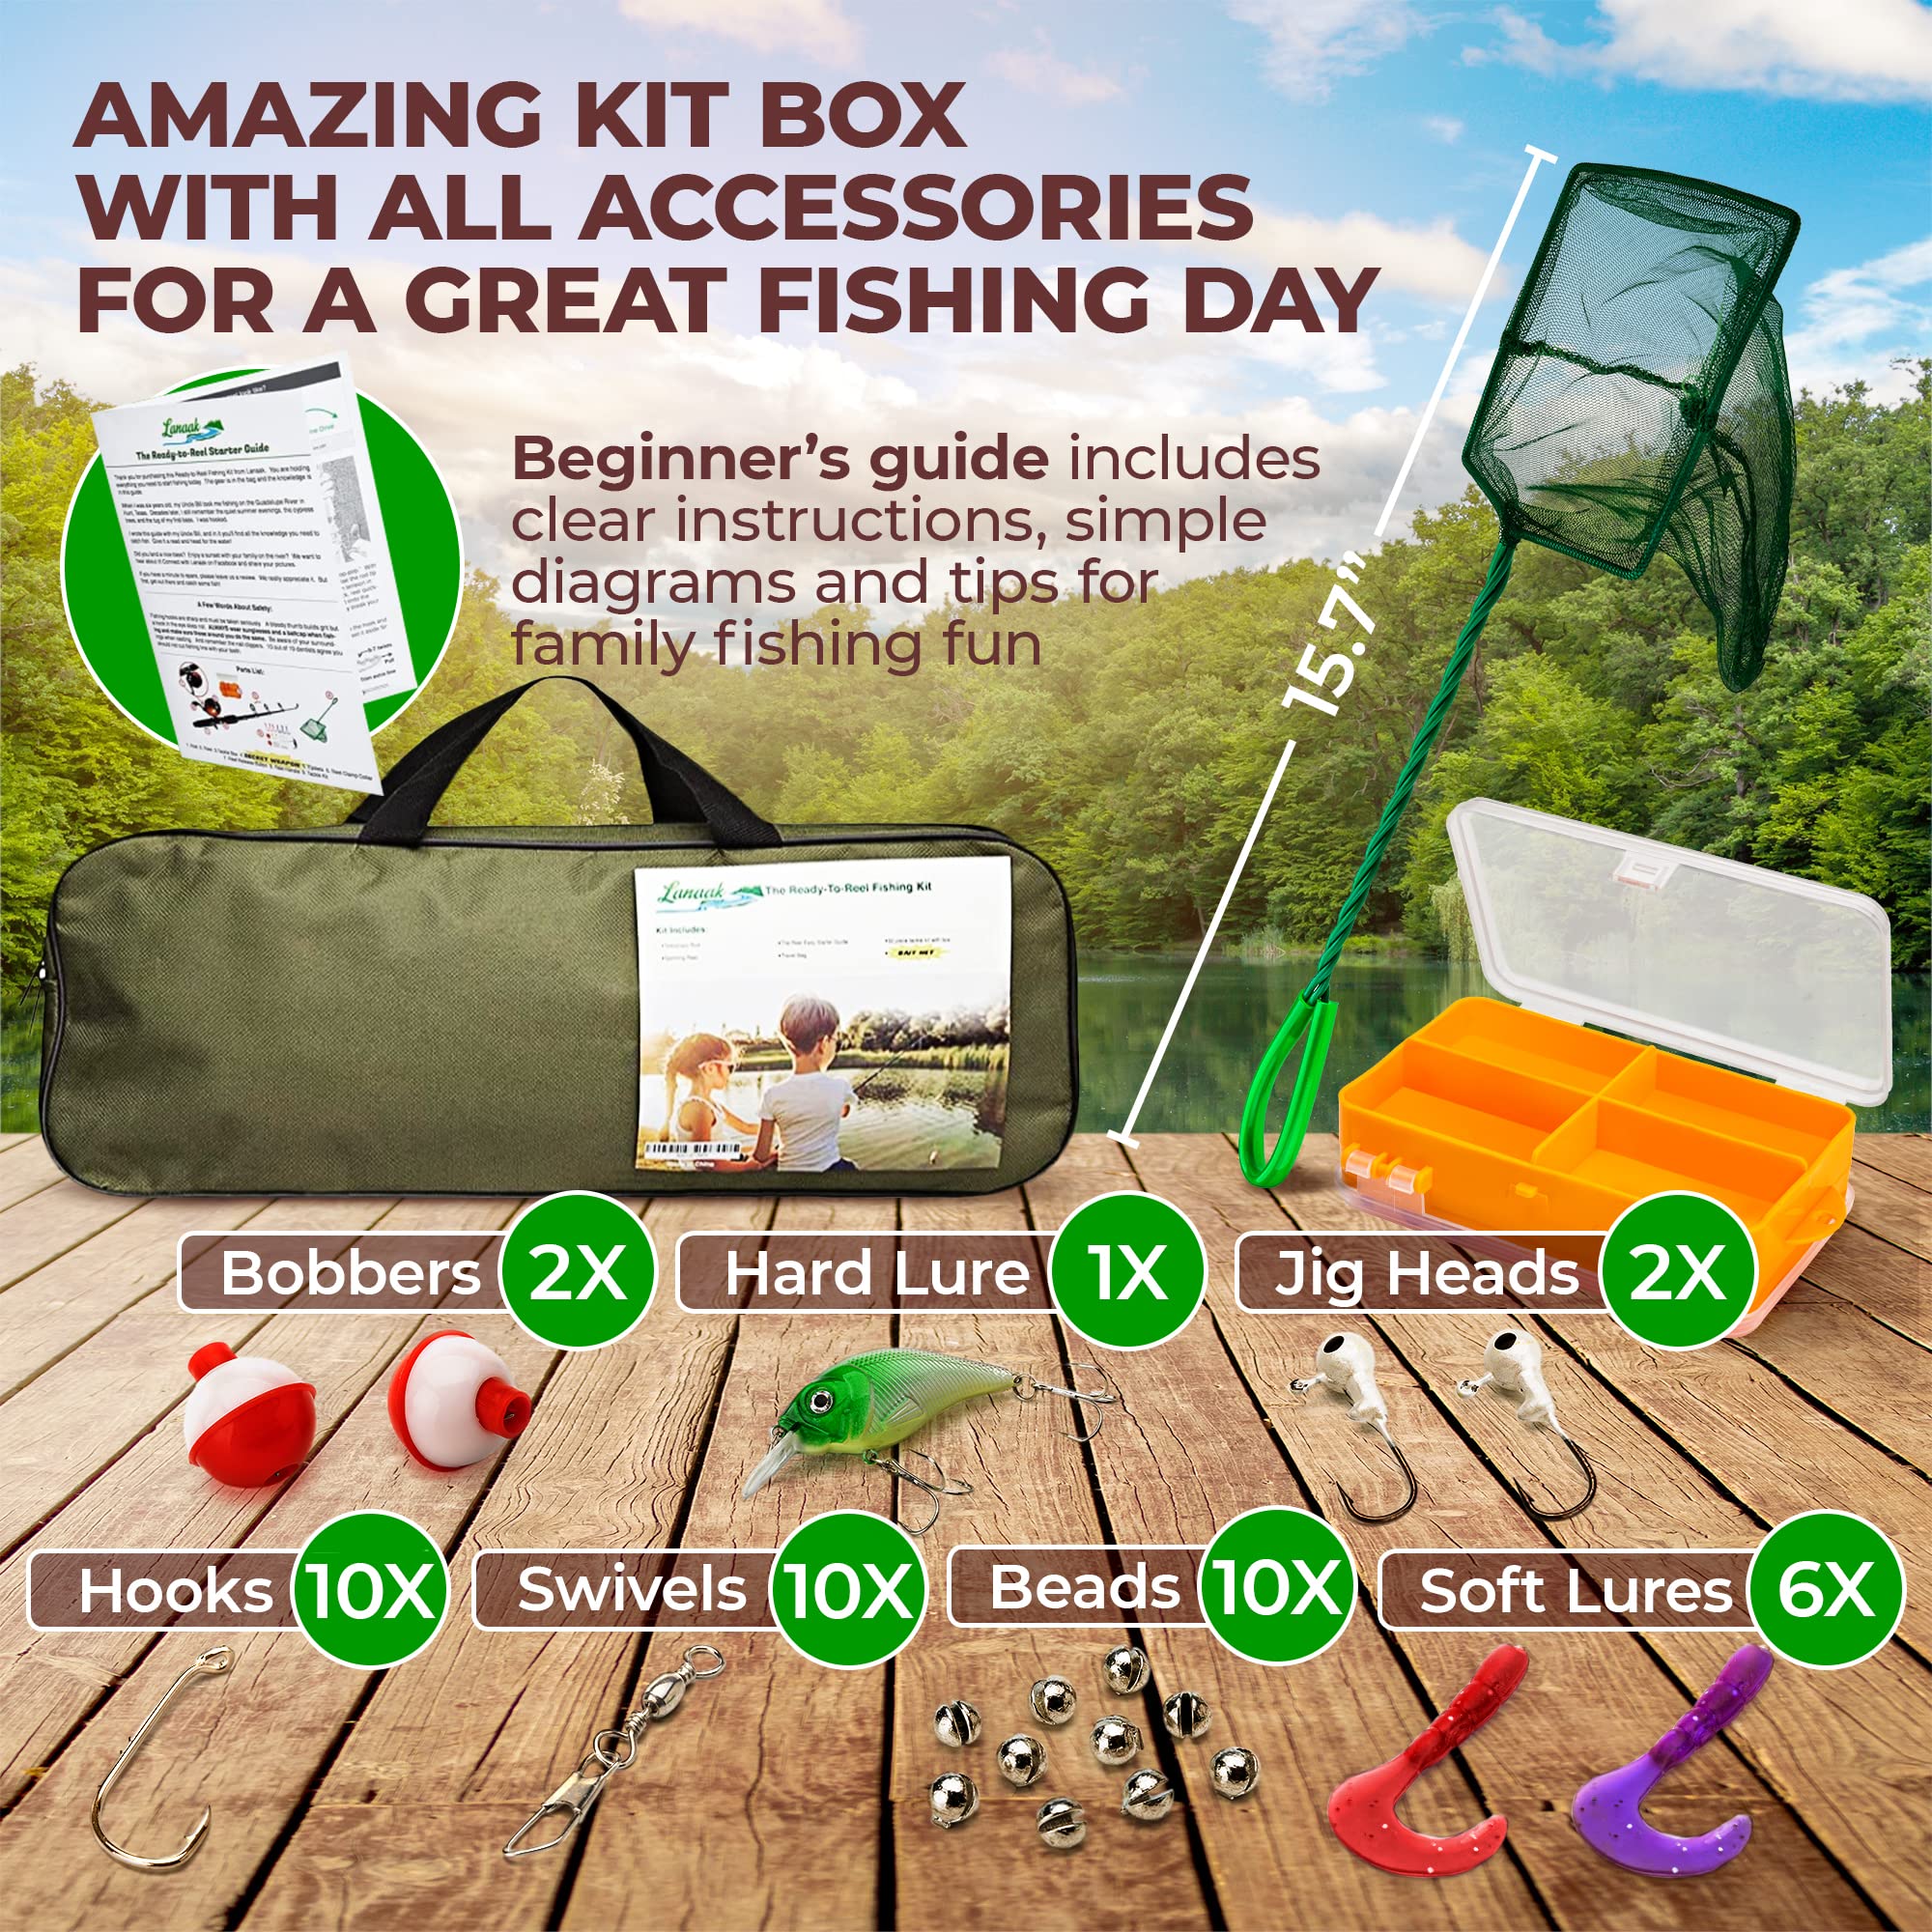 Urban Deco Kids Fishing Pole Set Portable Telescopic Kids Fishing Rod and  Reel Combo Kit with Tackle Box for Beginners, Boys,Girls,Youth,Children